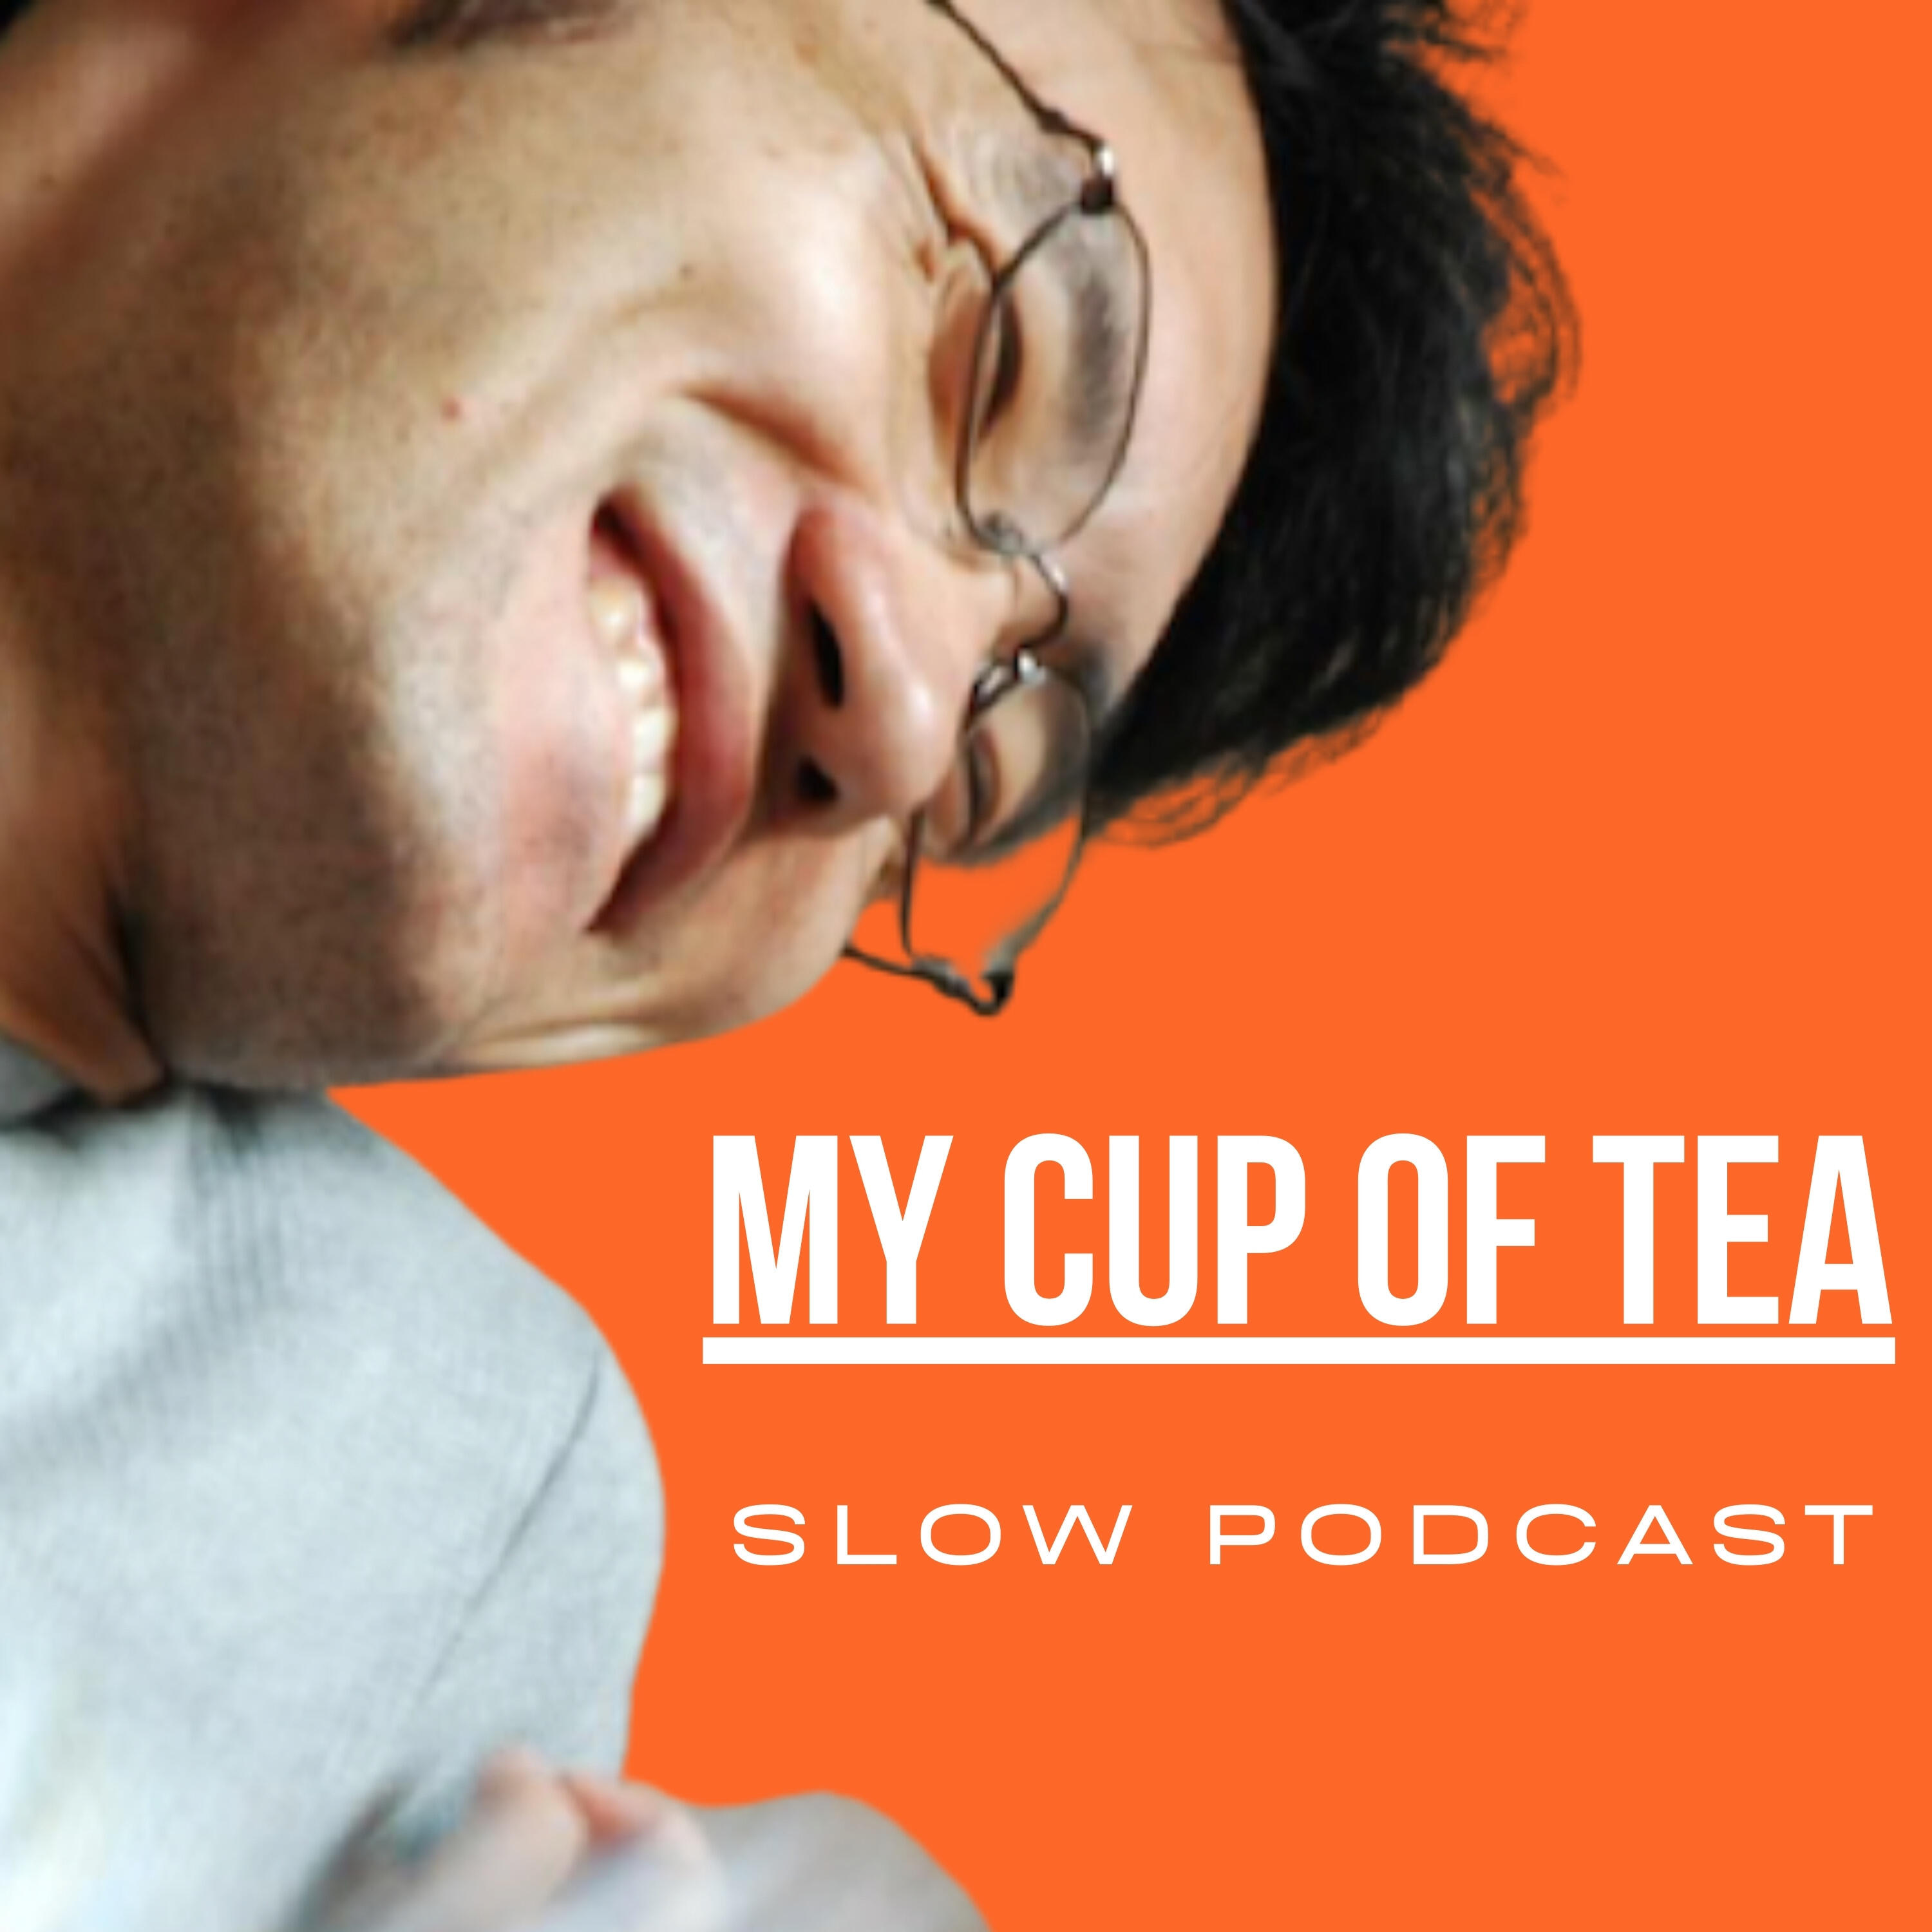 …My cup of tea… | シーズン３